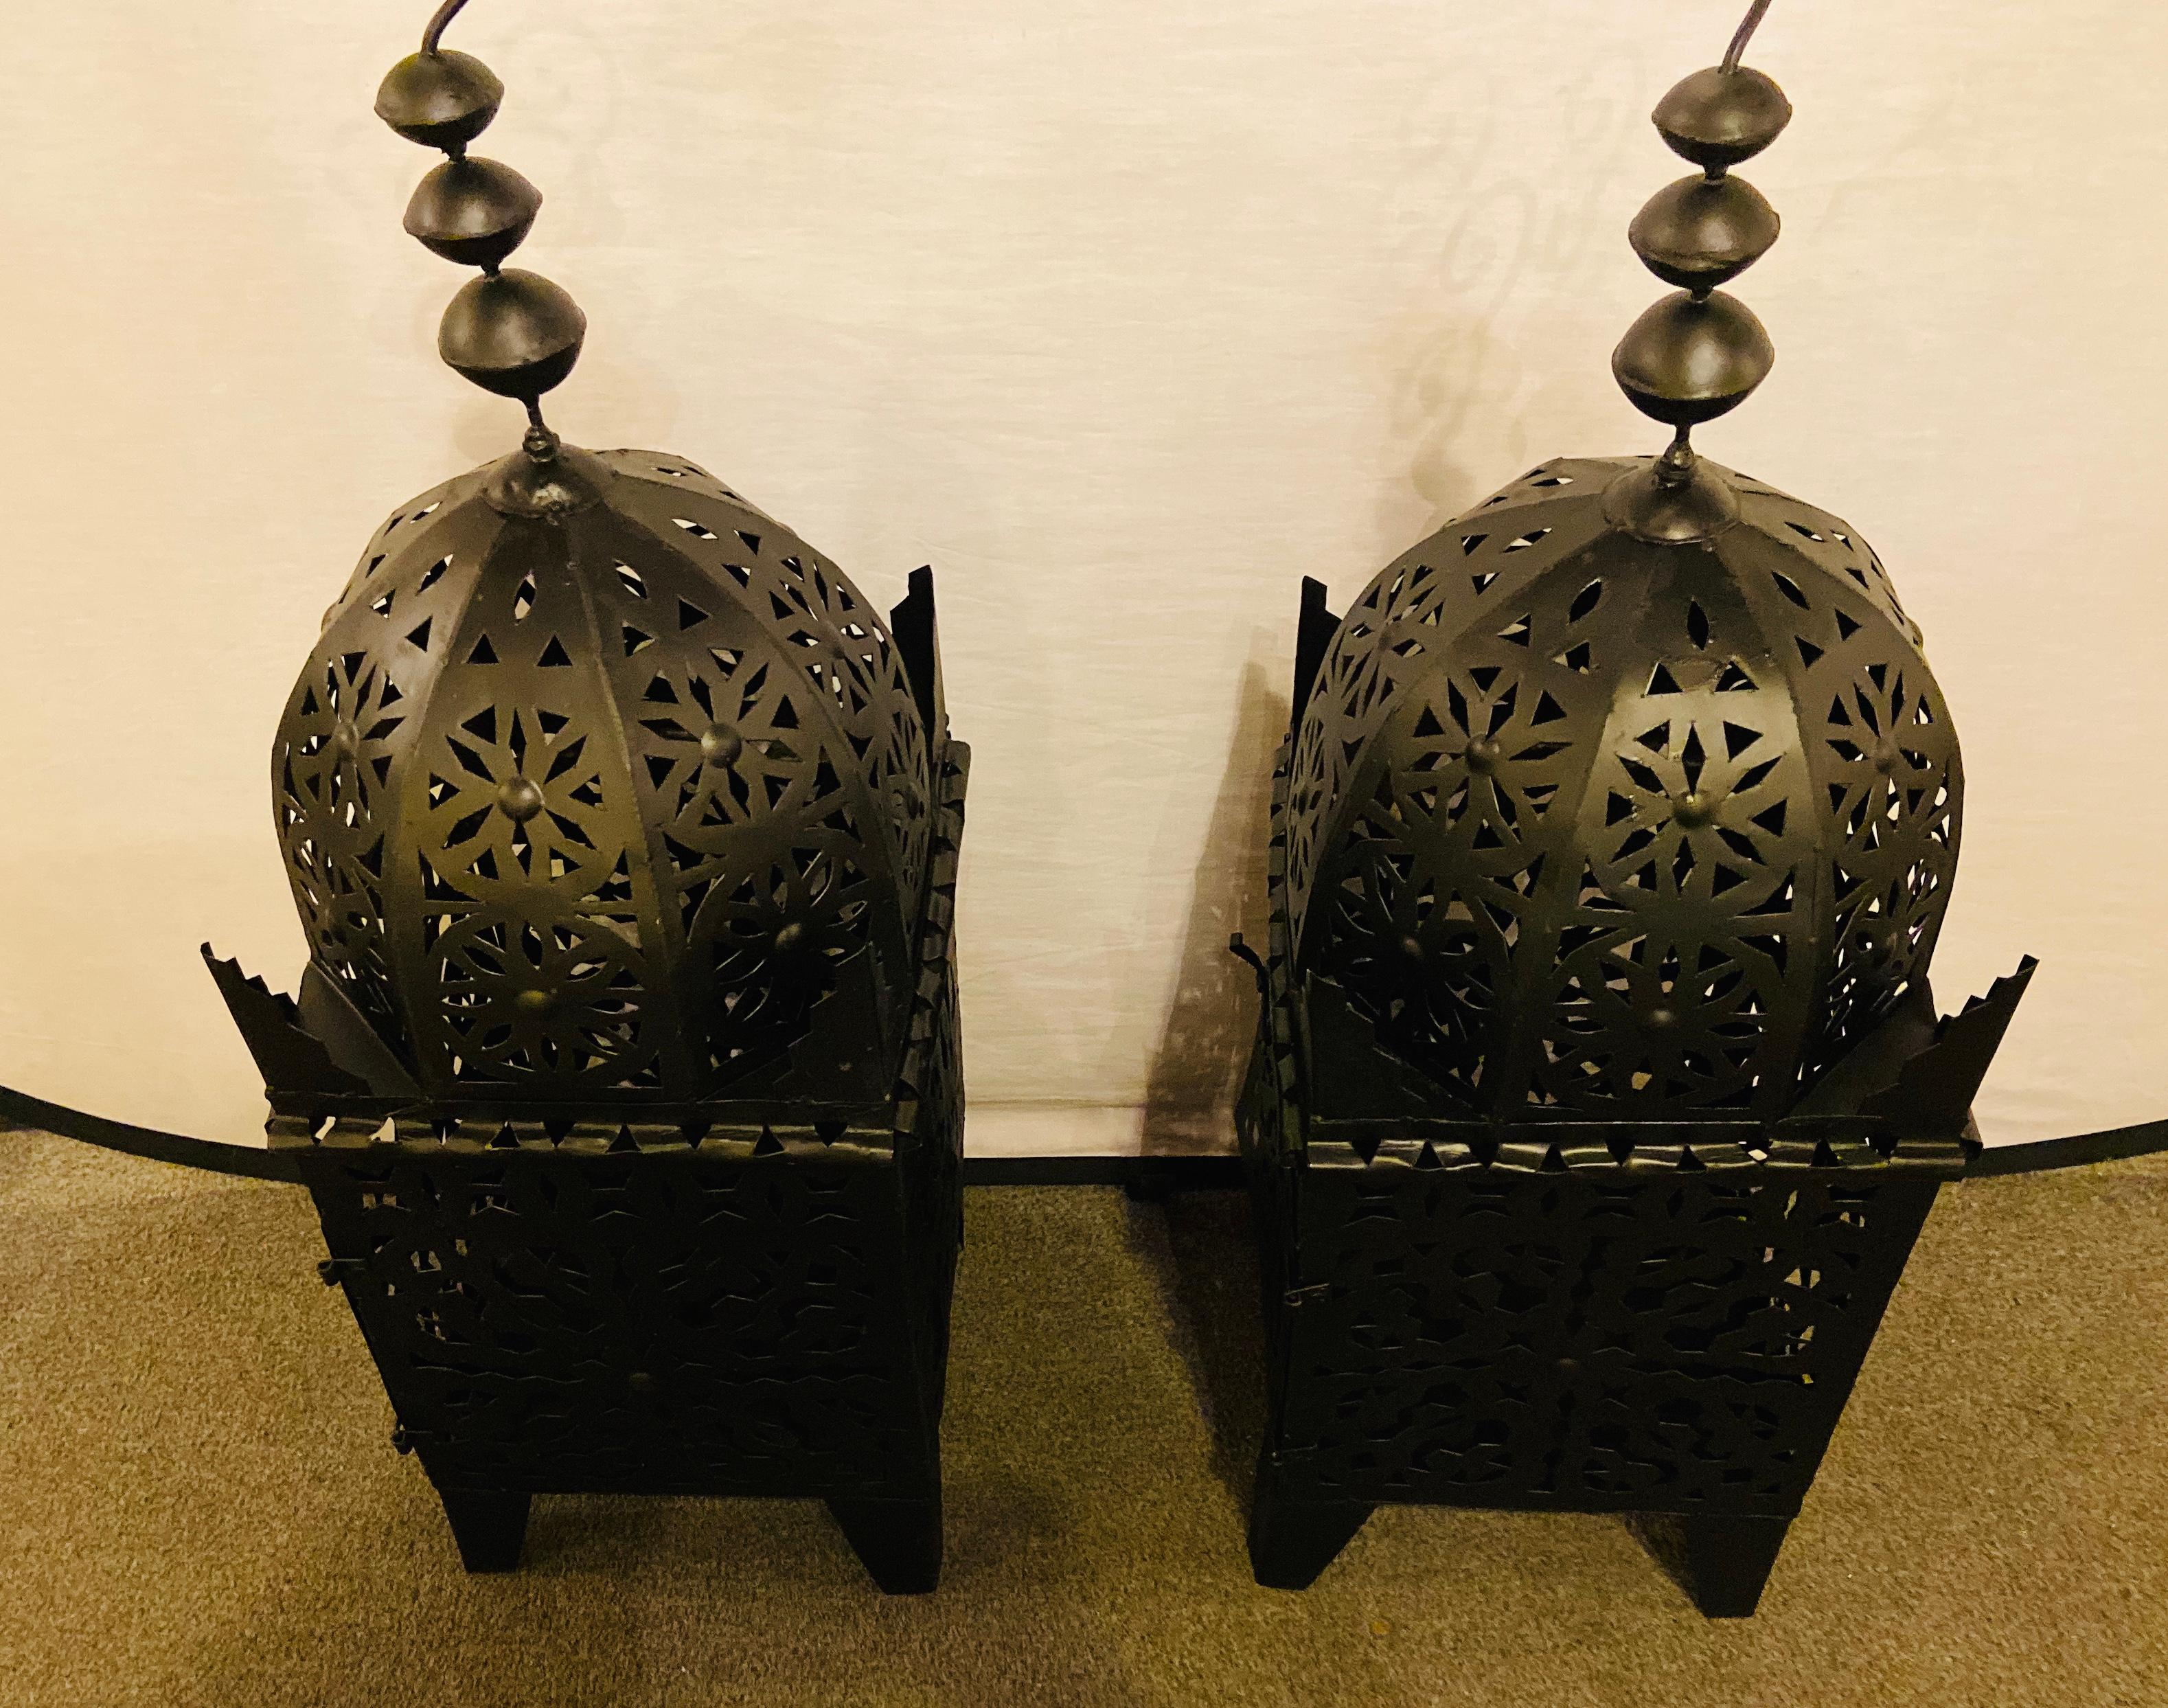 Garden floor lantern or candleholder in black, a pair

The pair of floor lanterns are hand carved of metal painted in black. Each lantern features a beautiful intricate design to emit soft and decorative lighting ambiance. The lantern can also be